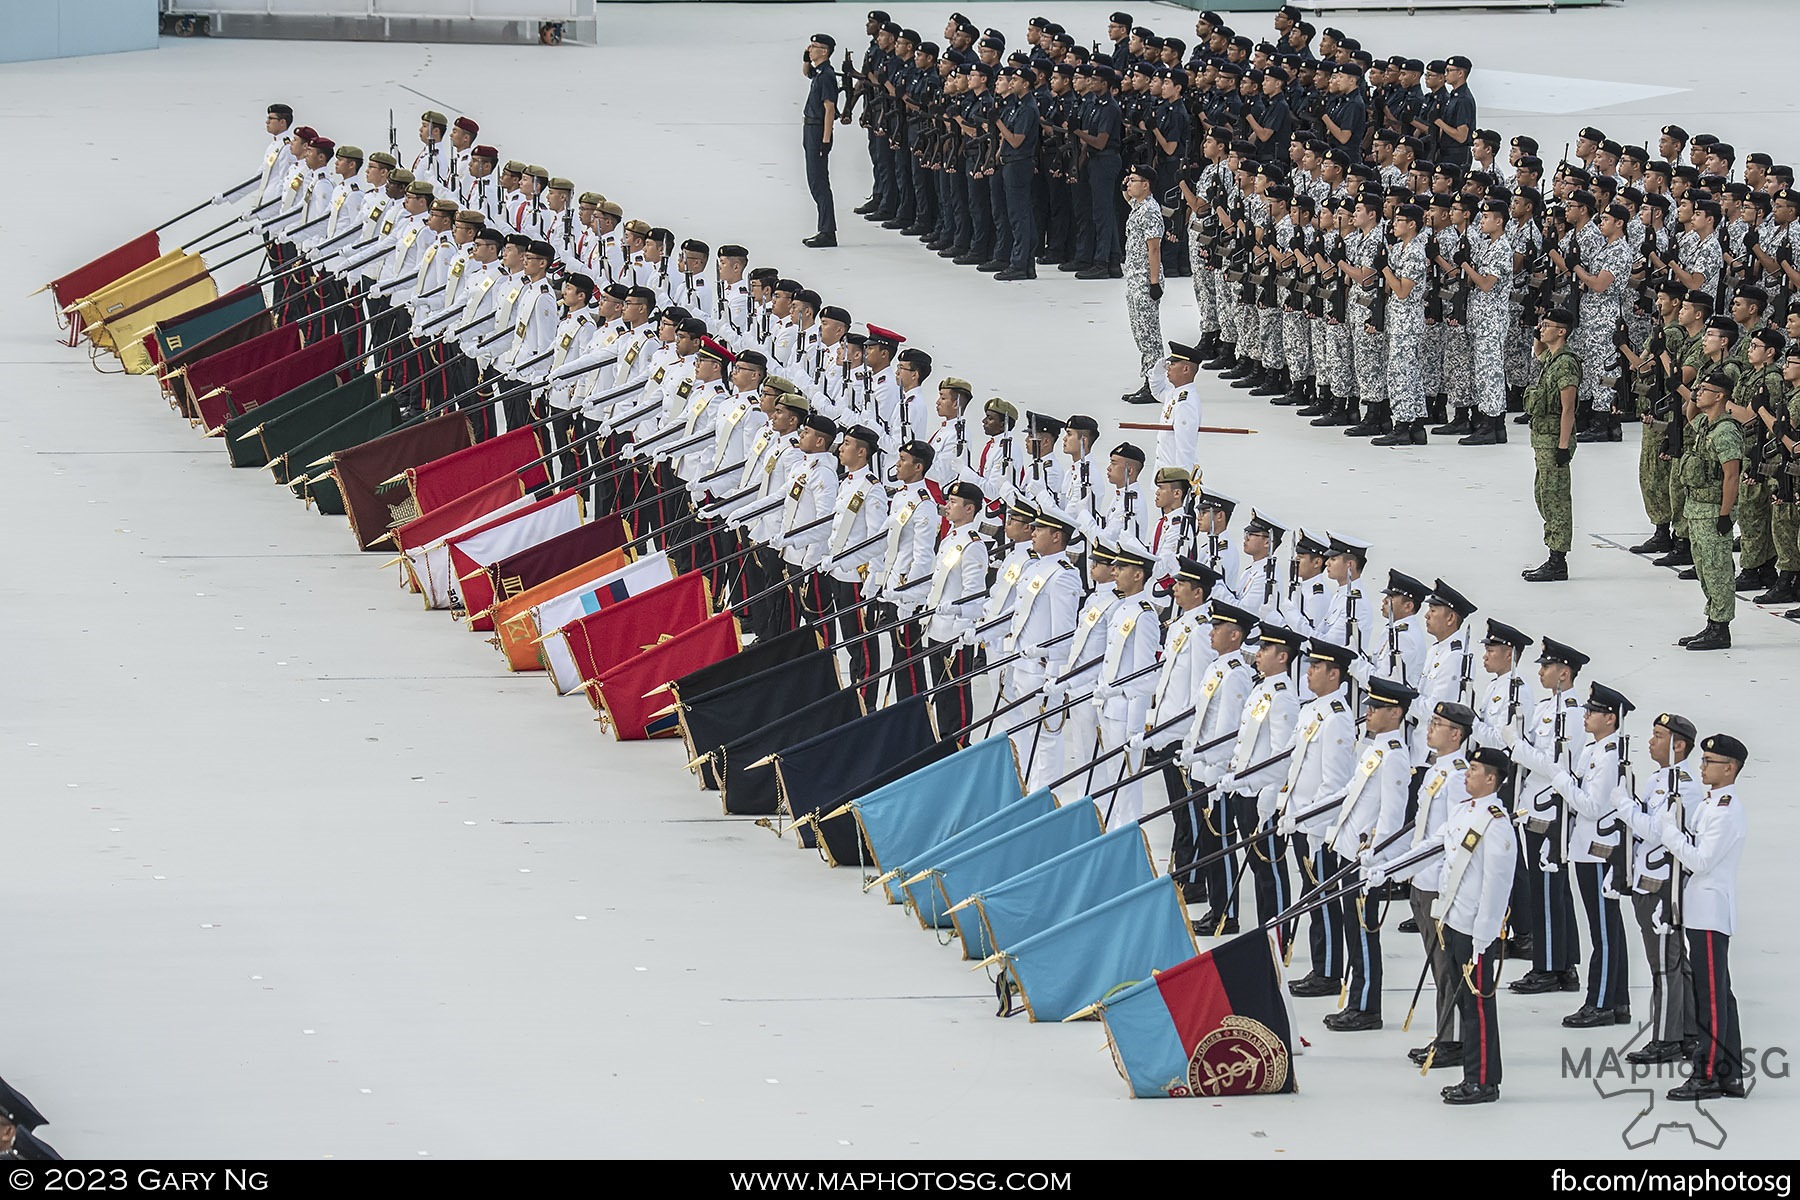 The Guard of Honour Colour Party lower their flags during the National Anthem